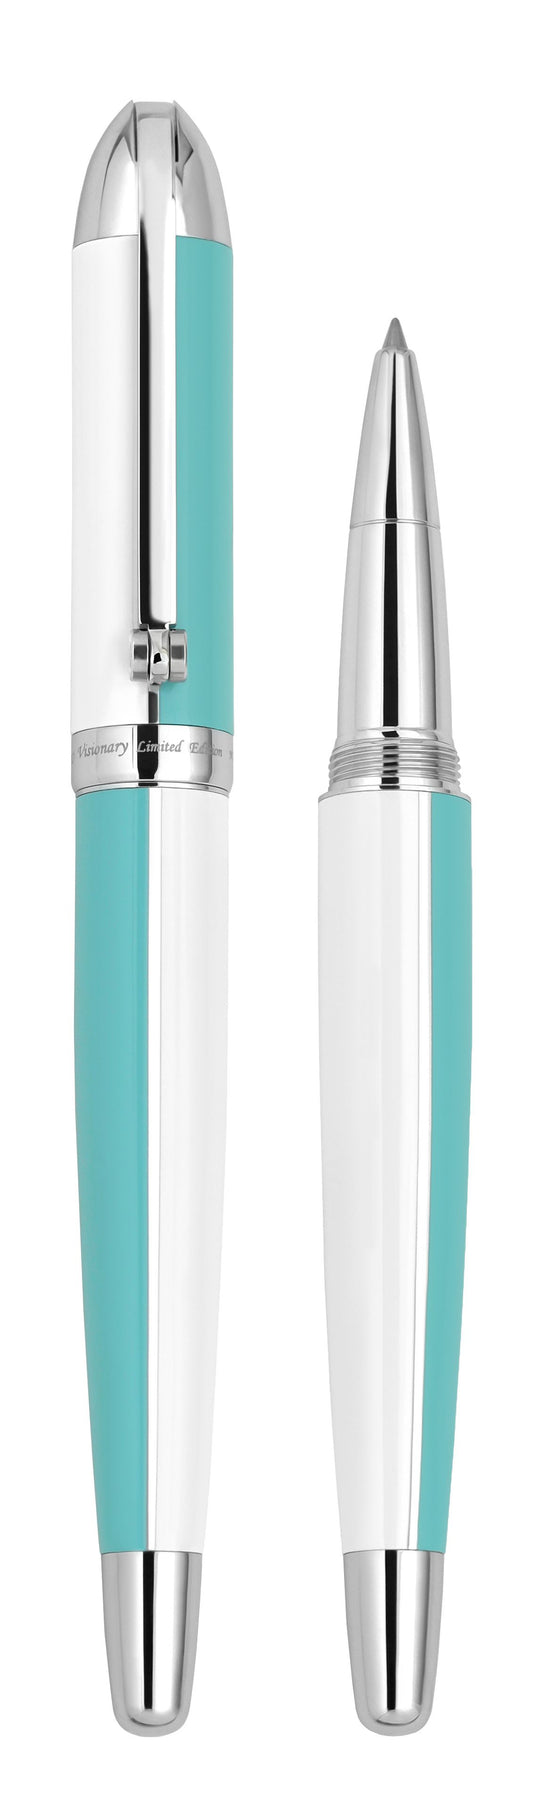 Xezo - Vertical view of two Visionary Sky Blue/White R rollerball pens. The pen on the left is capped, and the pen on the right has no cap